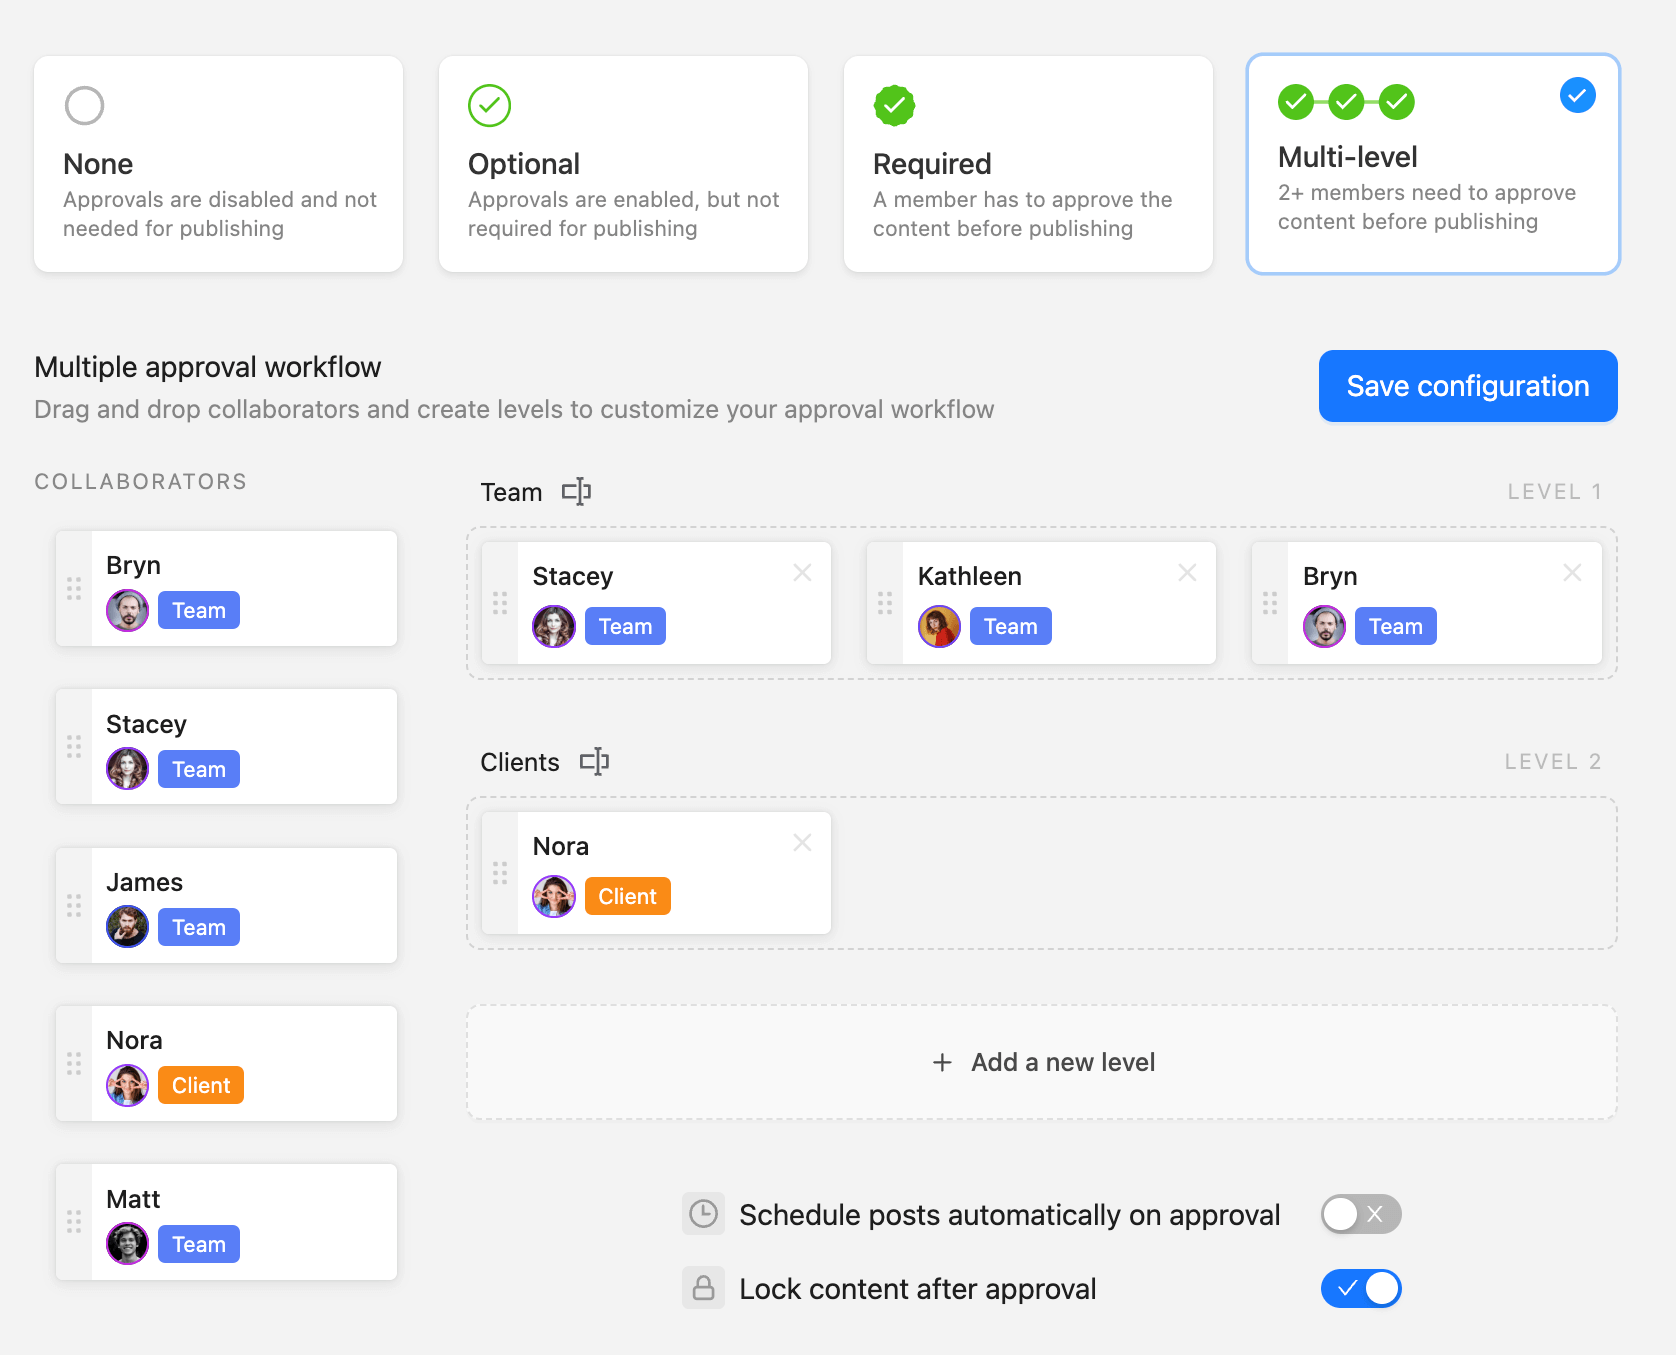 Multiple approval workflow settings for Jusco Soda, showing team and client collaborators with options for none, optional, required, and multi-level approvals.